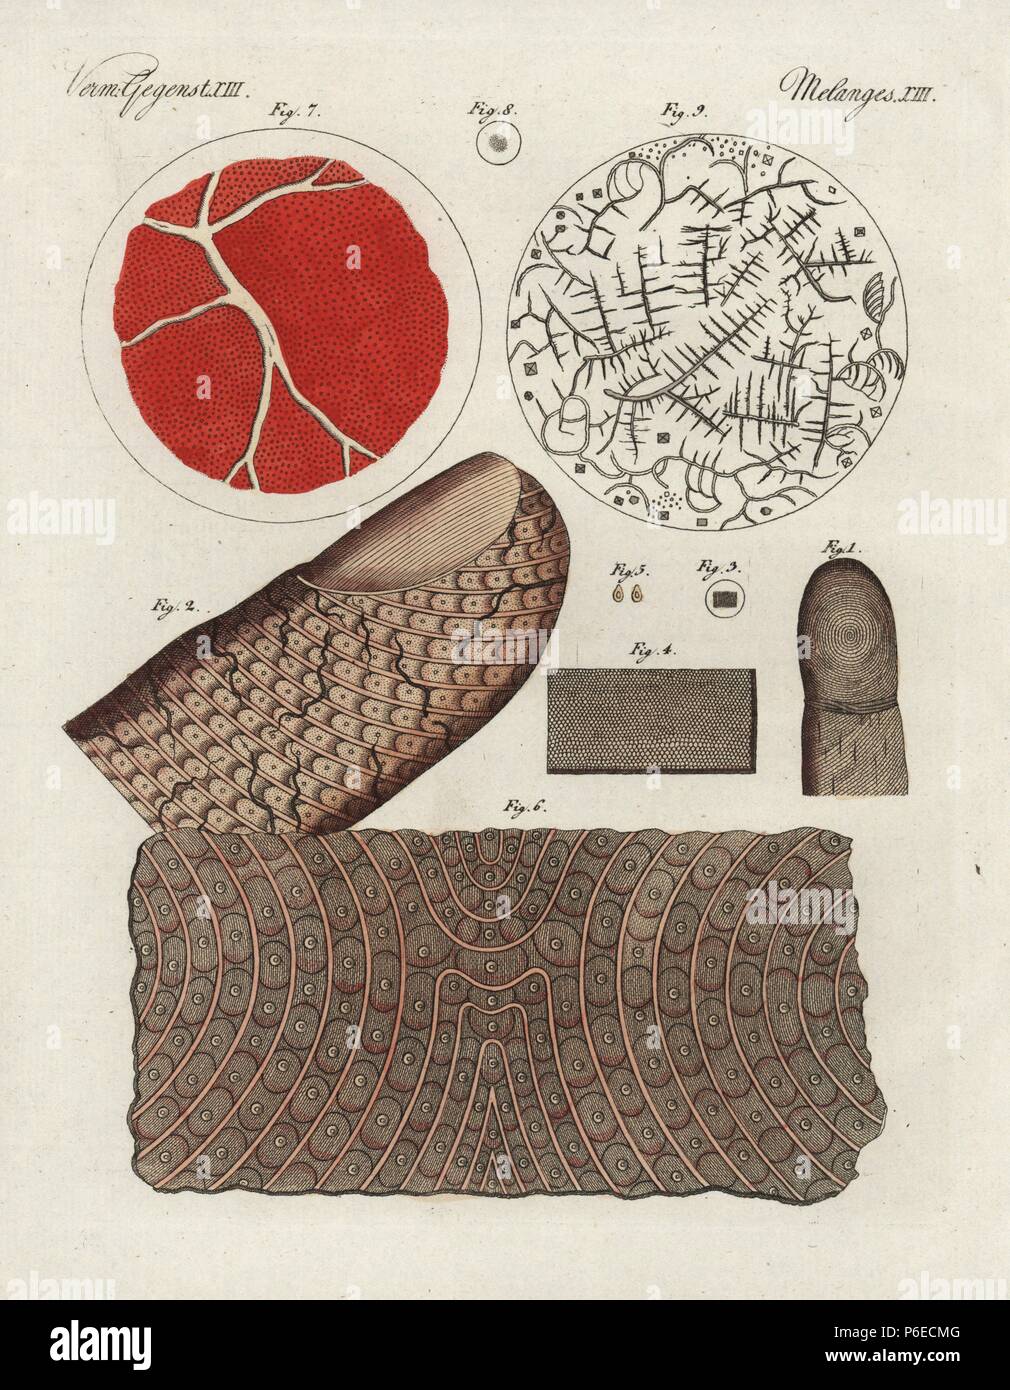 Human finger 1, magnified 2, epidermis 3, magnified 4, scales 5, magnified skin 6, and human blood 7, serum 8, and salt crystals in blood 9 under the microscope. Handcoloured copperplate engraving from Bertuch's 'Bilderbuch fur Kinder' (Picture Book for Children), Weimar, 1798. Friedrich Johann Bertuch (1747-1822) was a German publisher and man of arts most famous for his 12-volume encyclopedia for children illustrated with 1,200 engraved plates on natural history, science, costume, mythology, etc., published from 1790-1830. Stock Photo